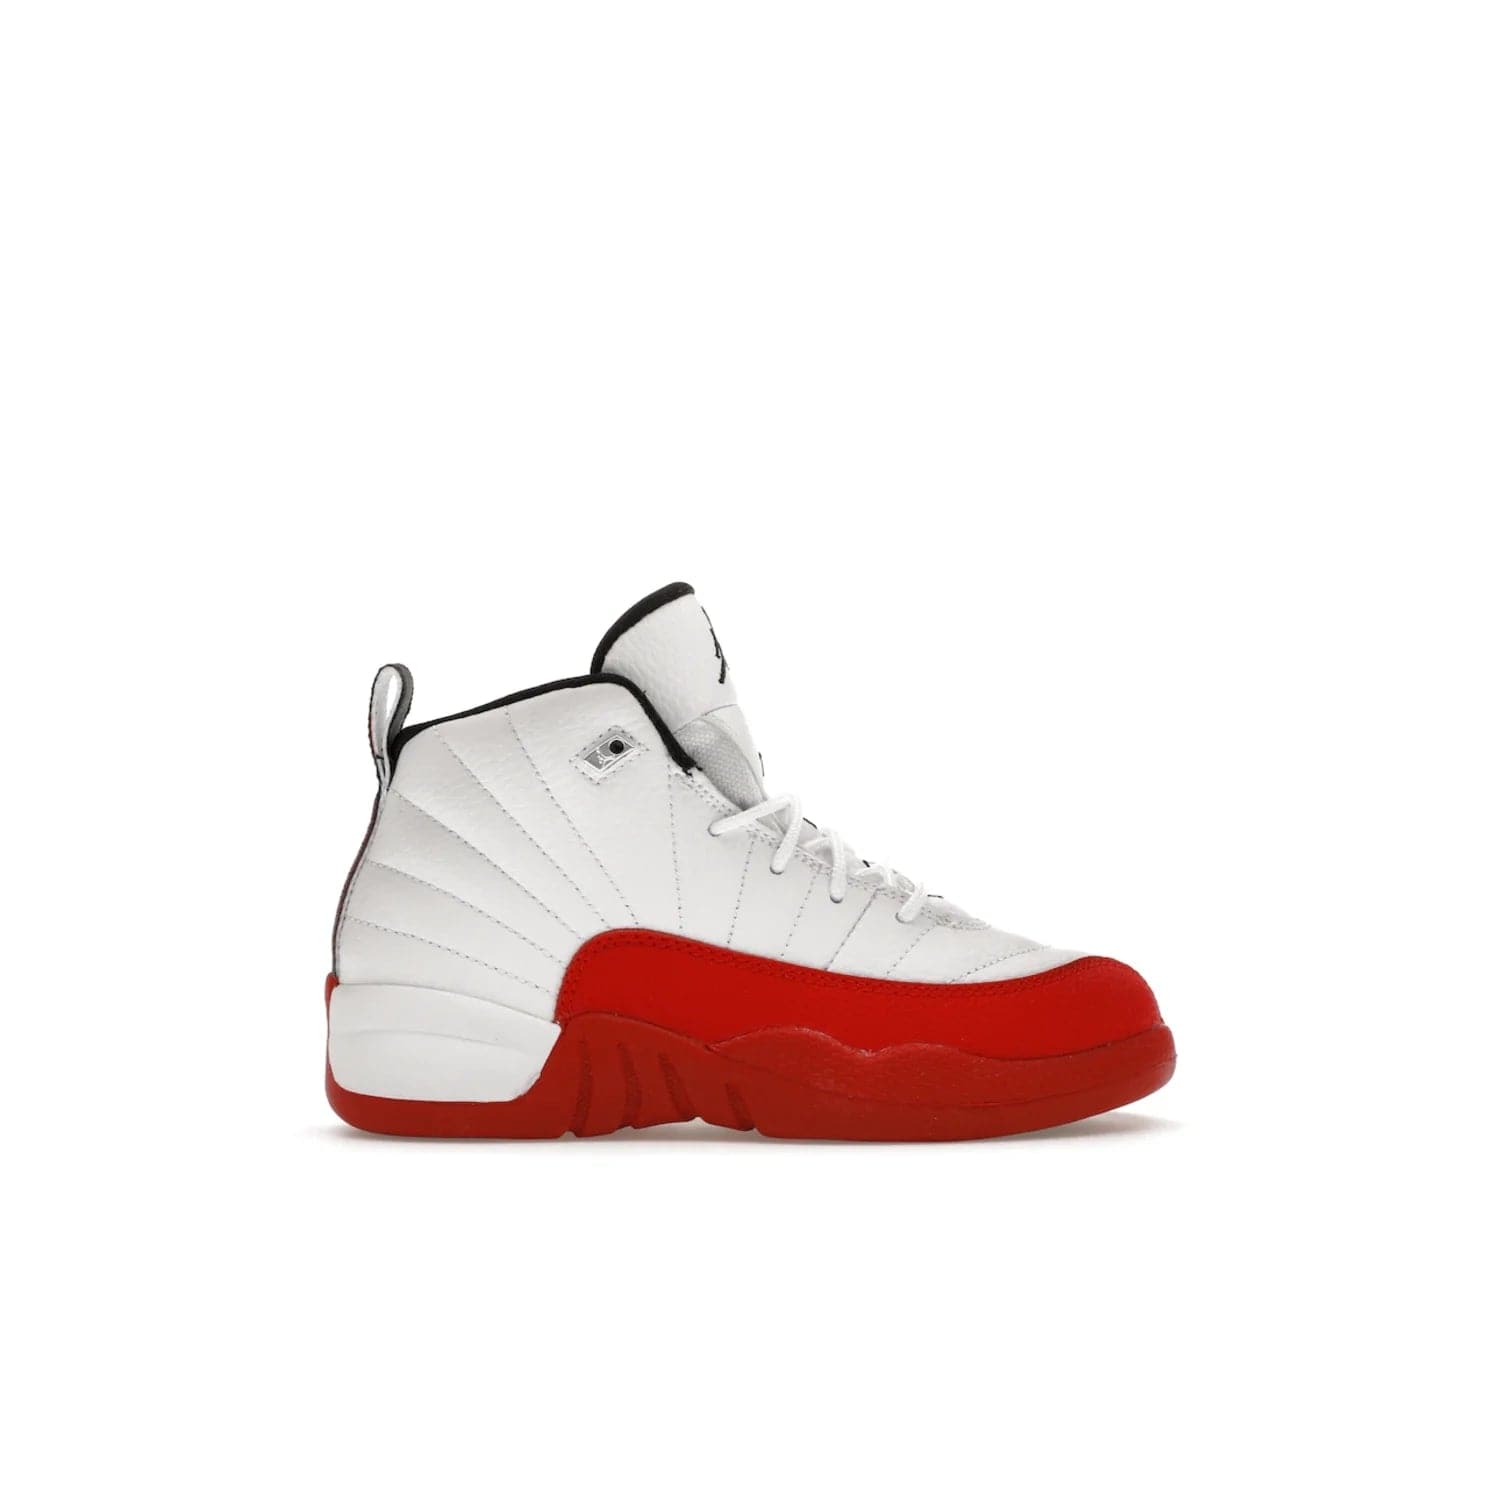 Jordan 12 Retro Cherry (2023) (PS) - Image 1 - Only at www.BallersClubKickz.com - Jordan 12 Retro Cherry dropping for toddlers in 2023! White leather upper with black overlays and red branding. Classic court style for your little one.